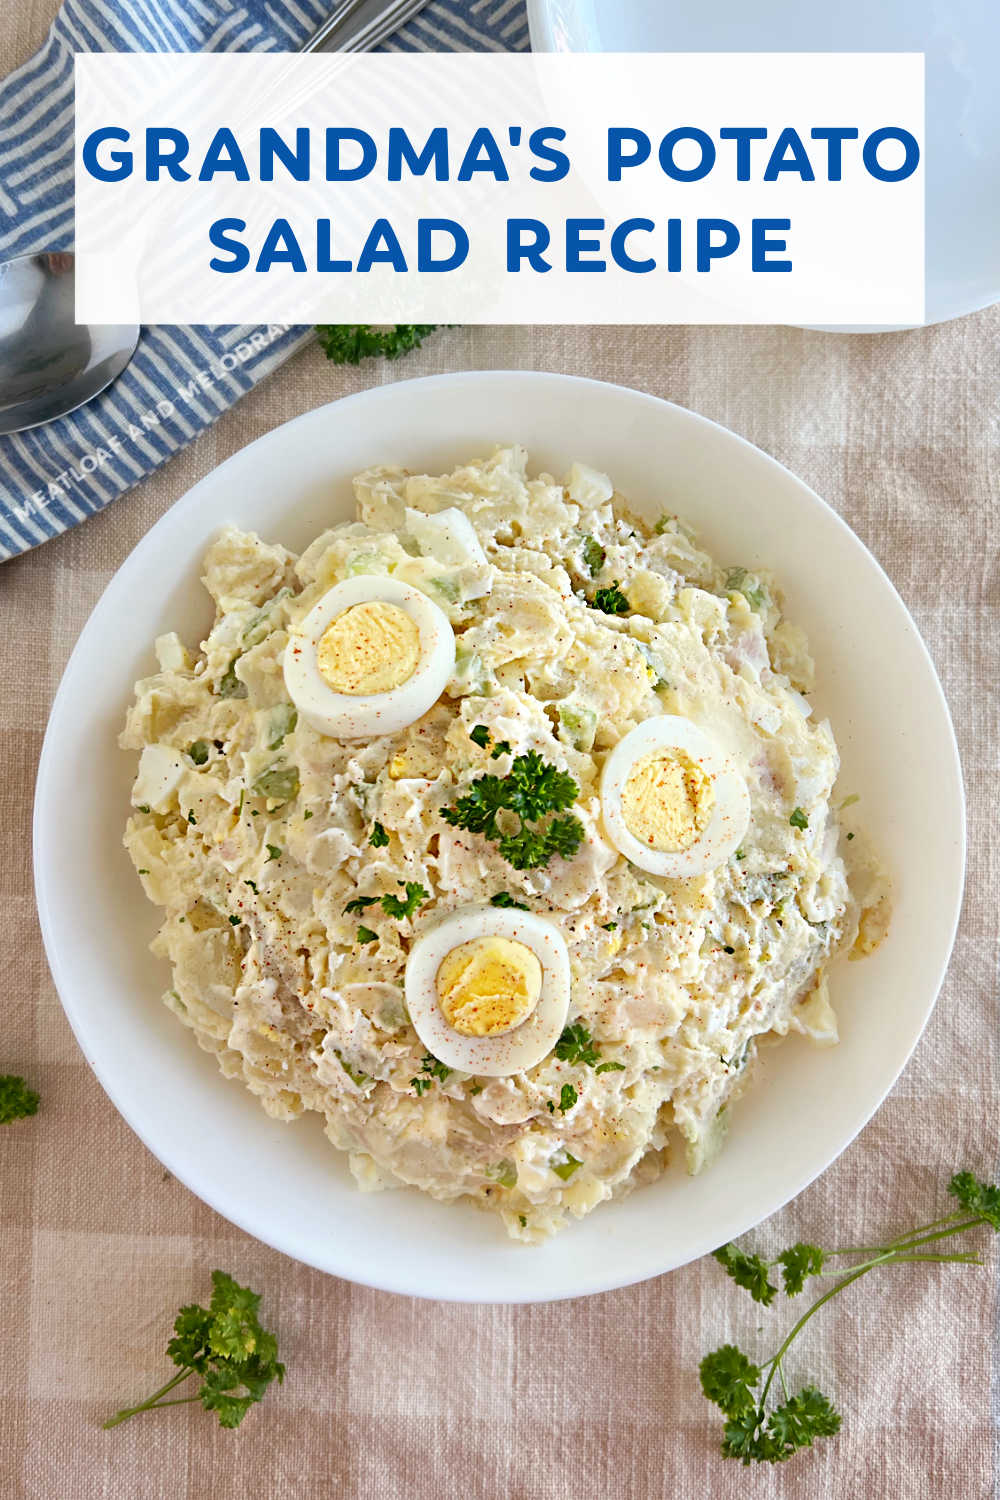 Grandma's Potato Salad Recipe is an easy old fashioned potato salad with few ingredients. A delicious side dish for summer and a family favorite! This classic potato salad tastes just like Mom used to make! via @meamel